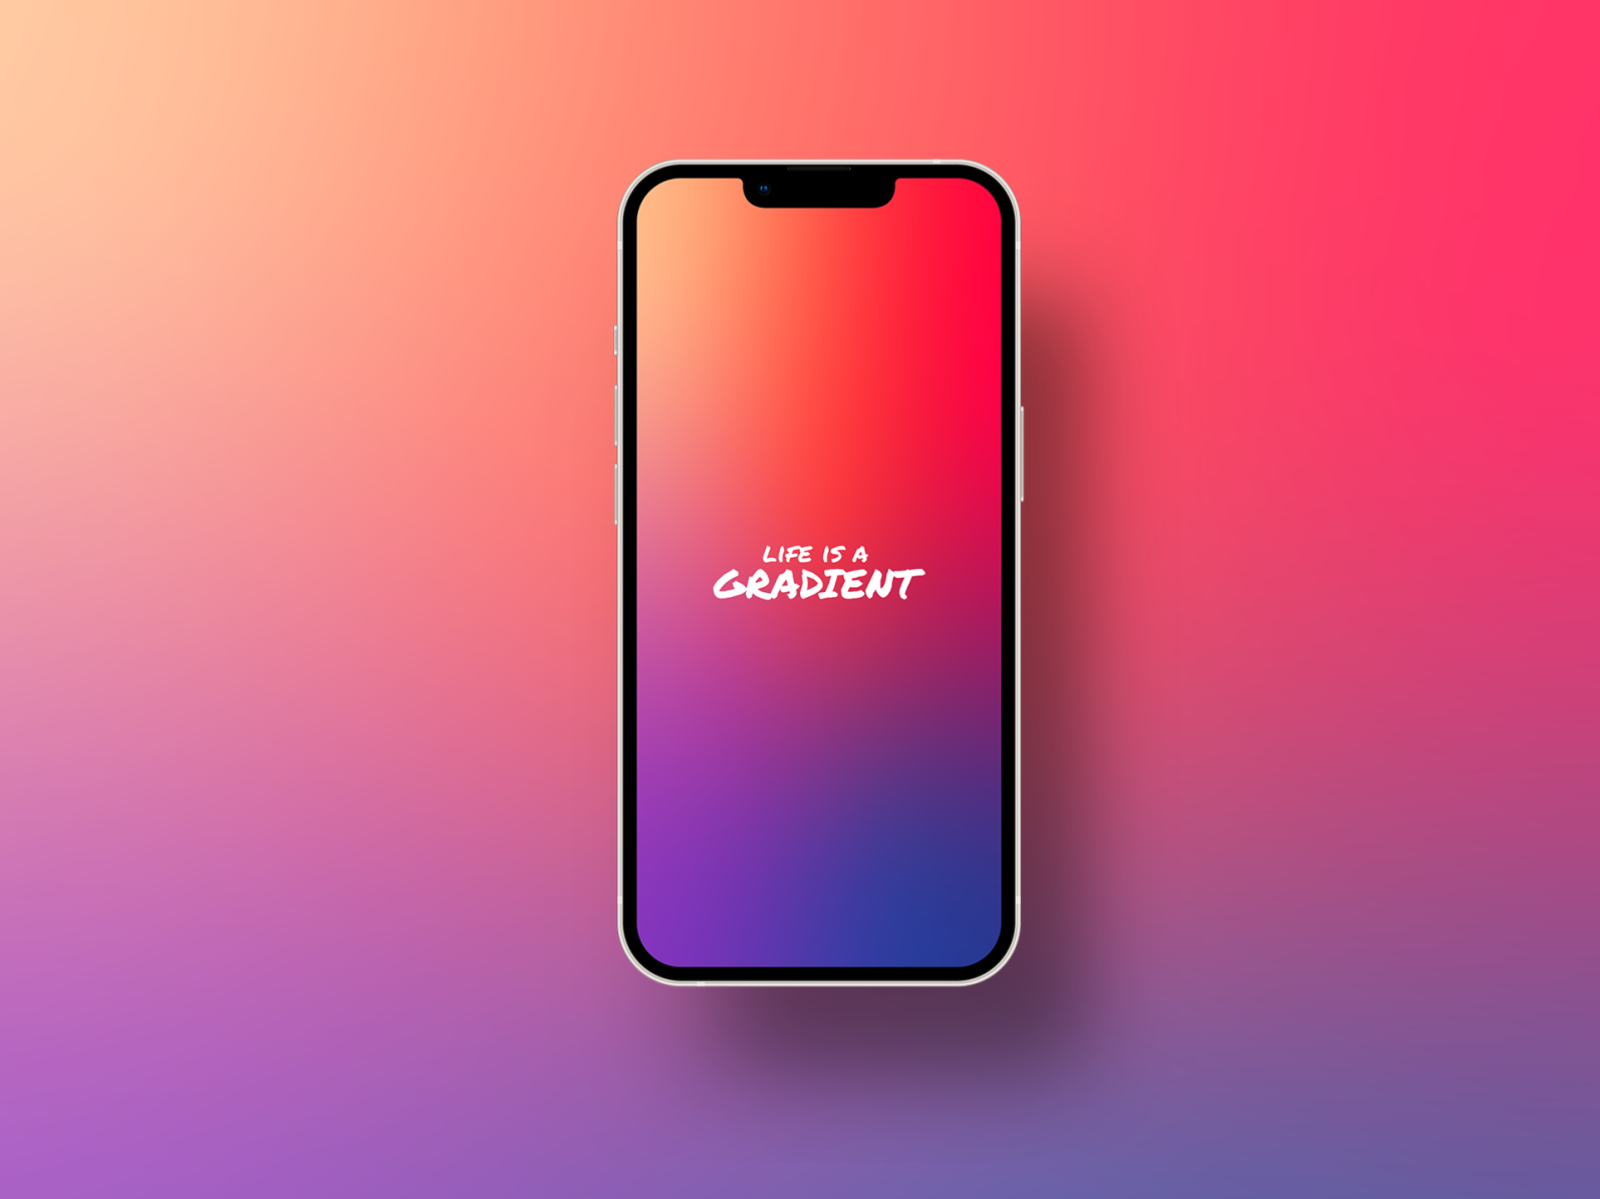 This wallpaper app makes your iPhone X's notch disappear